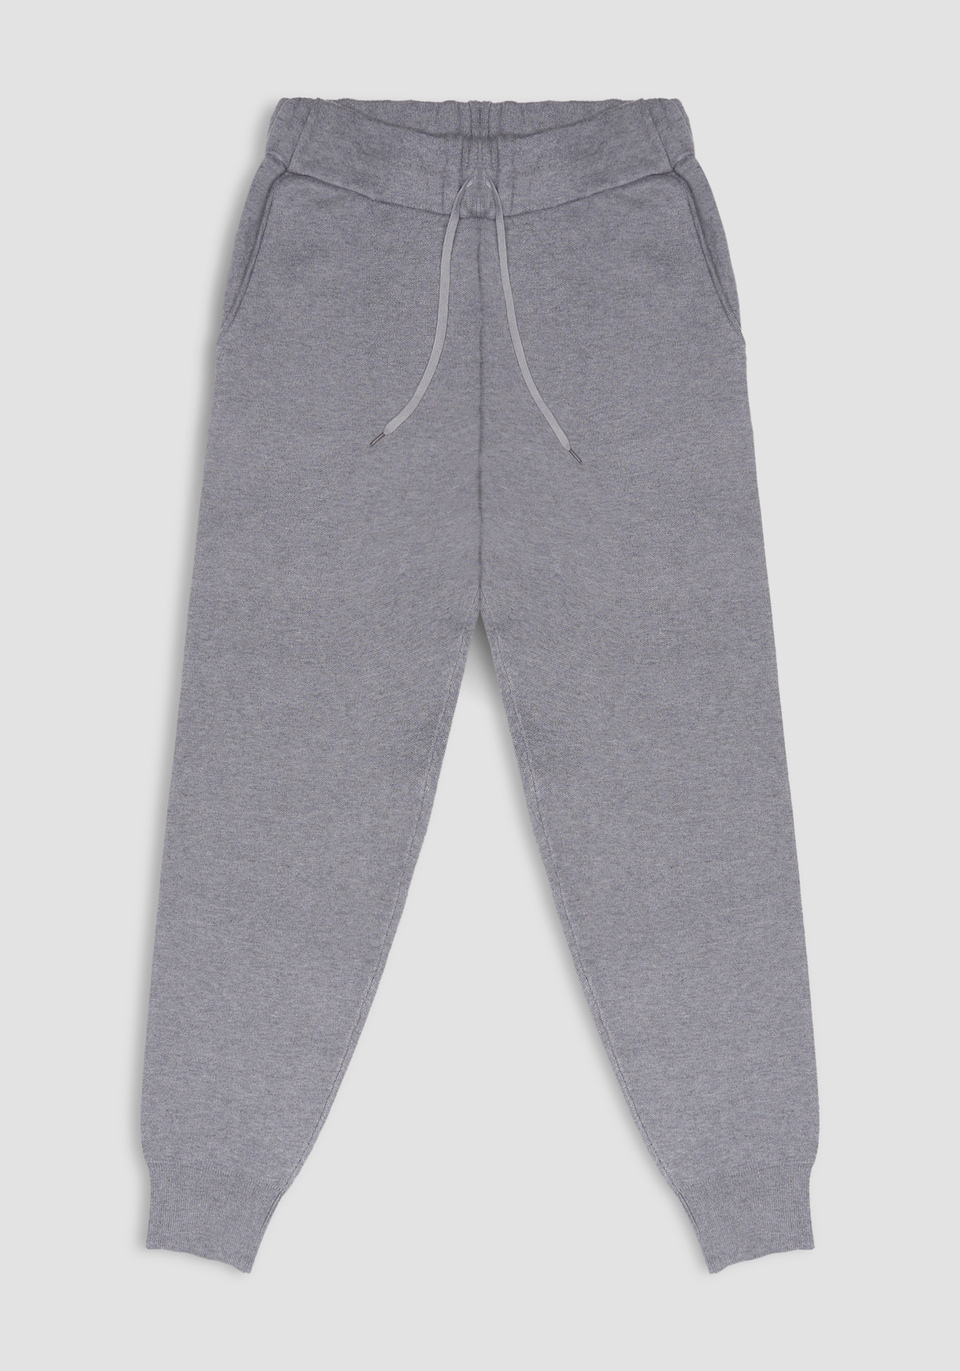 SOFT-TOUCH VISCOSE-BLEND YARN JOGGERS WITH POCKETS - Antony Morato Online Shop